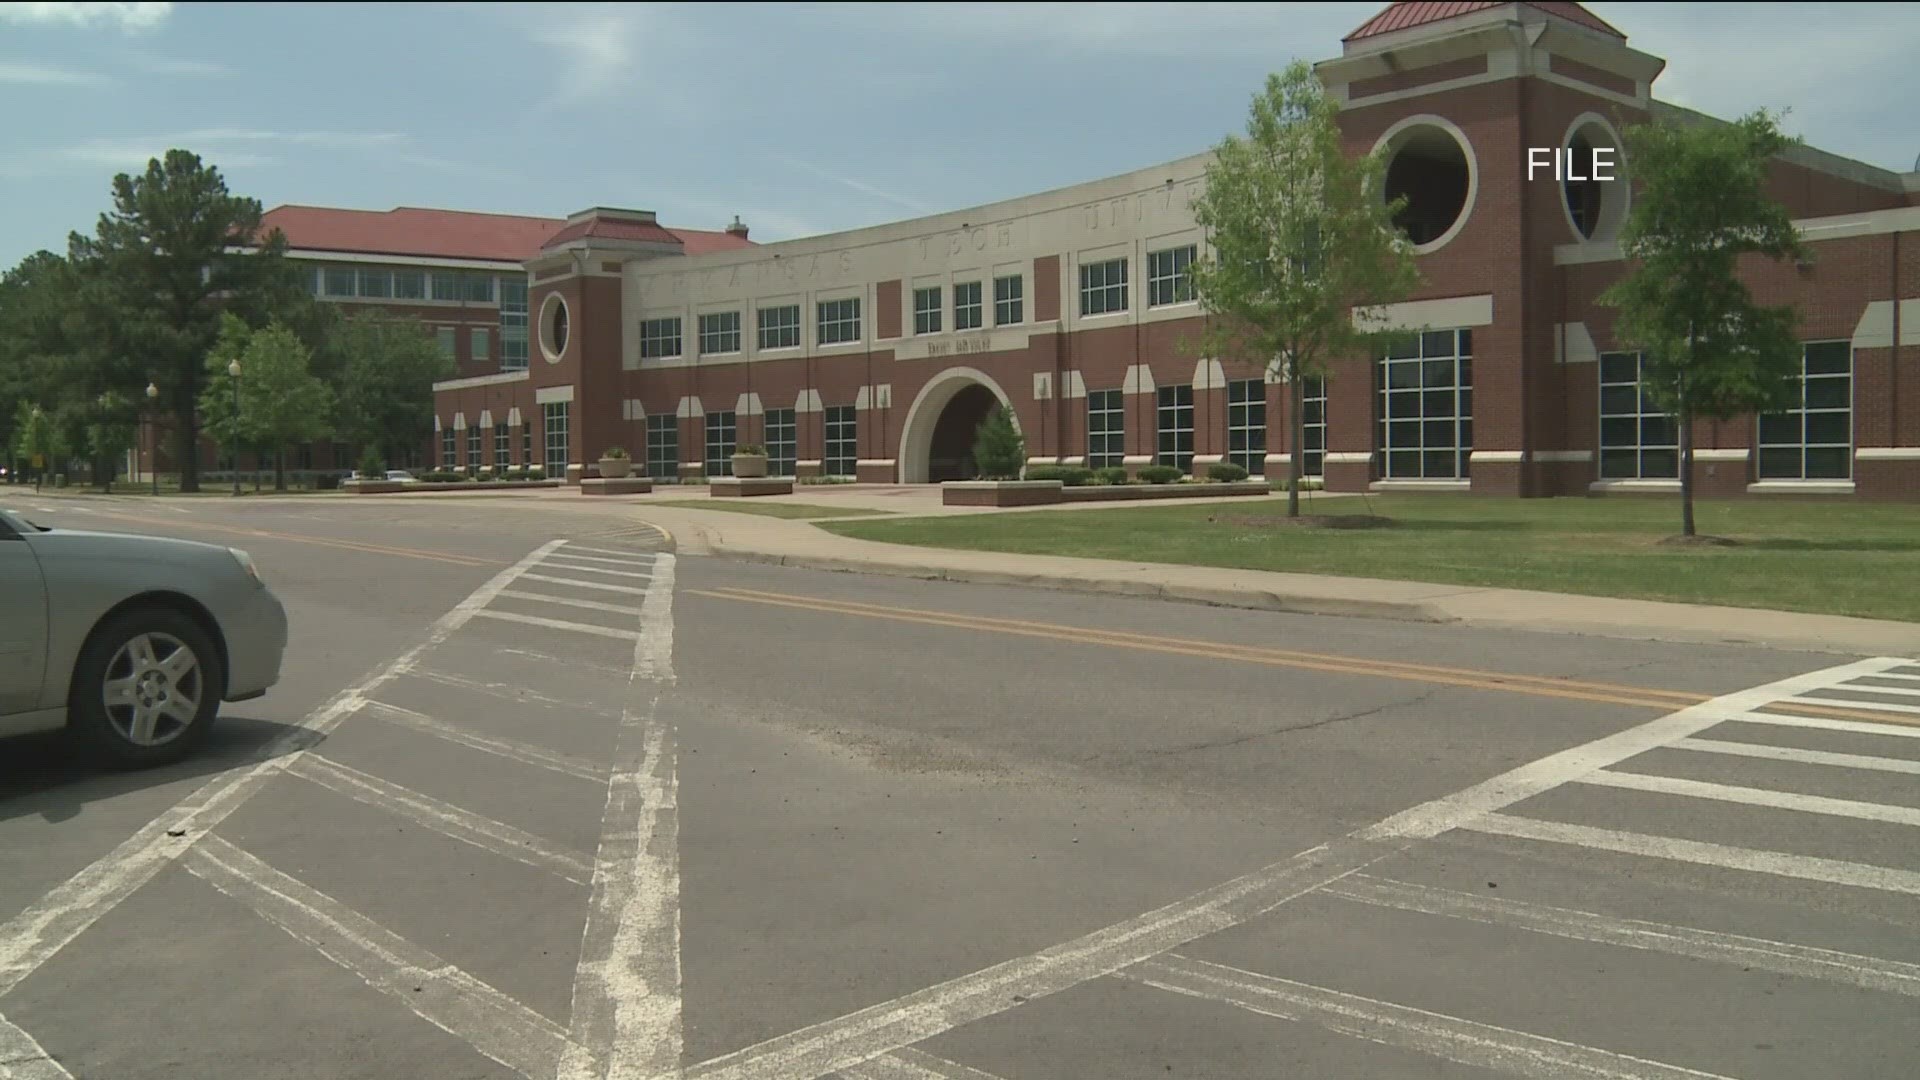 Arkansas Tech University announced its tuition rates will remain the same for the next school year. Watch the video for more details.